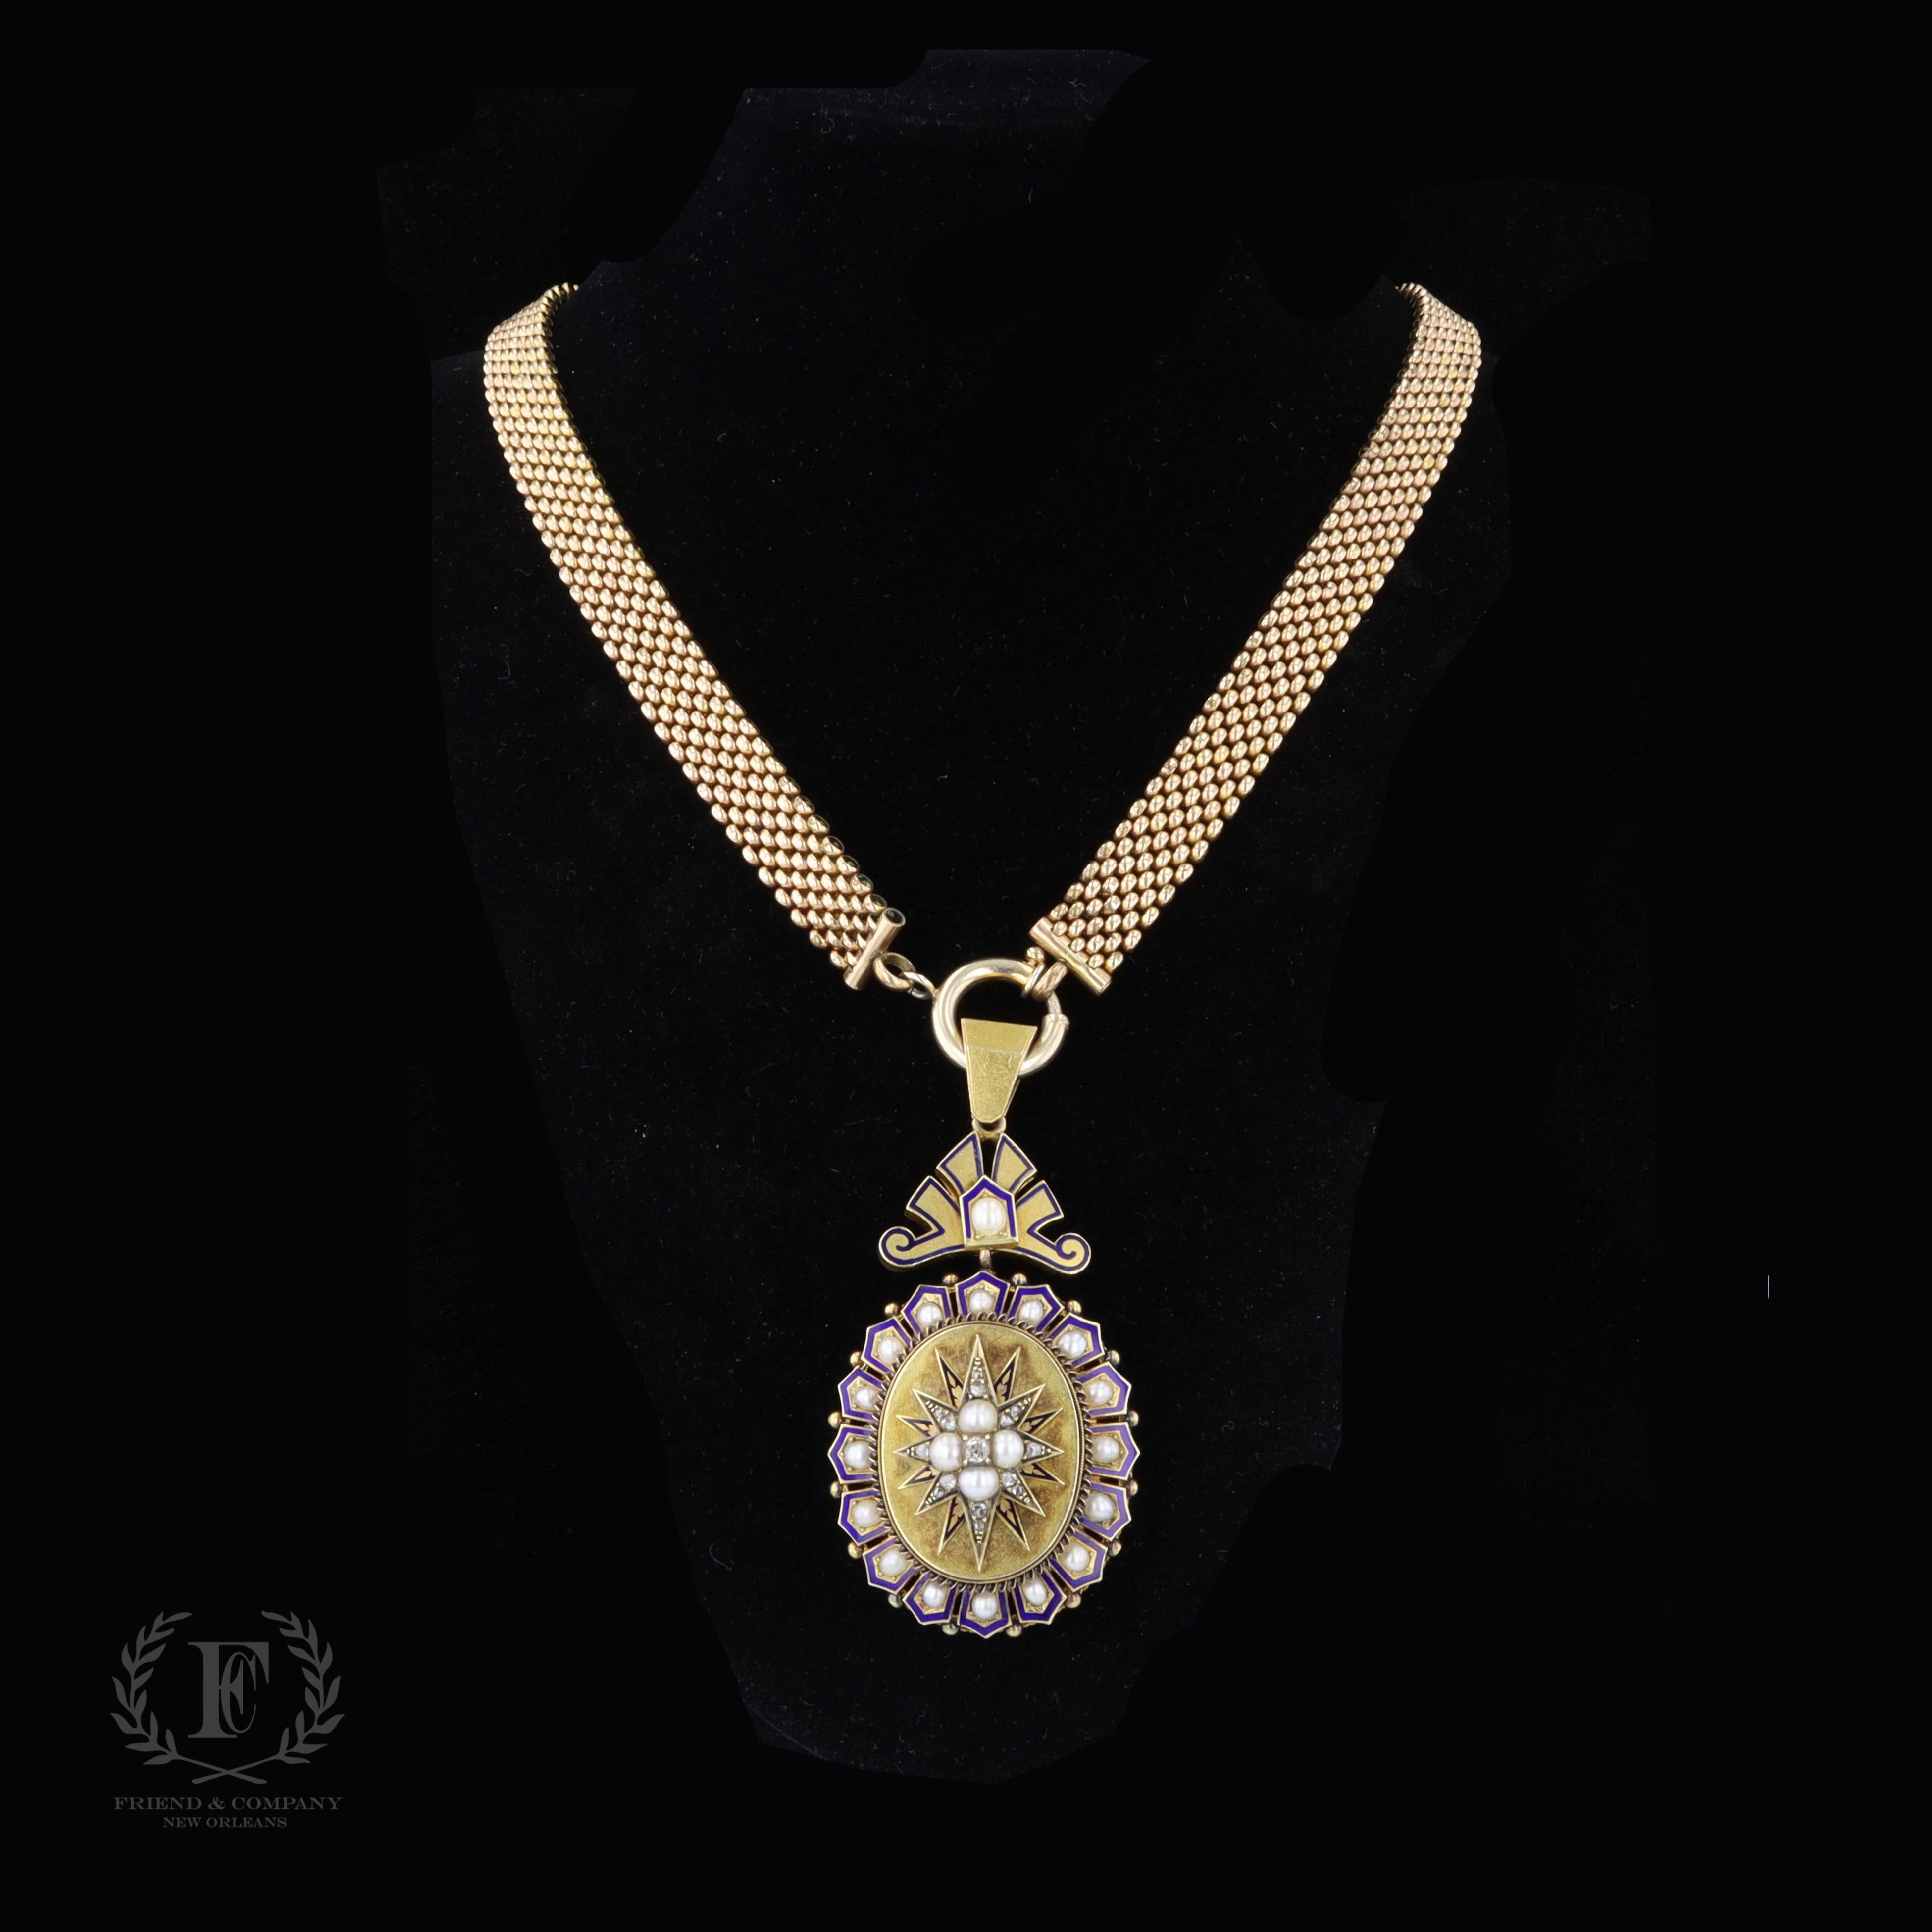 This charming 14 karat yellow gold enamel pendant necklace dates back to the 1940s. A photo can be added to the back of the pendant. The pendant is set with pearl and diamond accents. The measurements of the pendant are 71 millimeters by 35